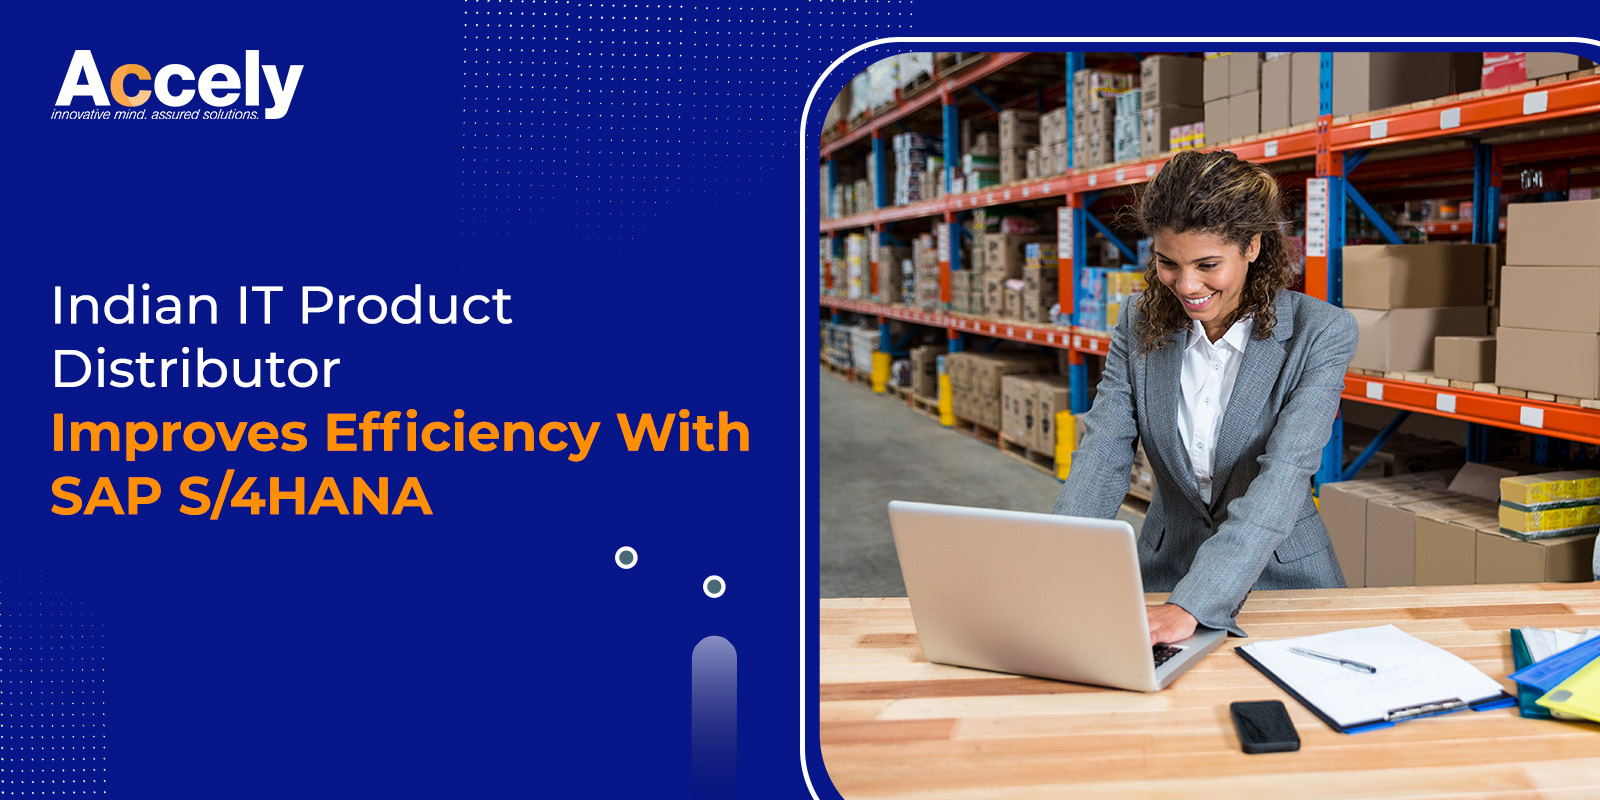 Indian IT Product Distributor Improves Efficiency With SAP S/4HANA